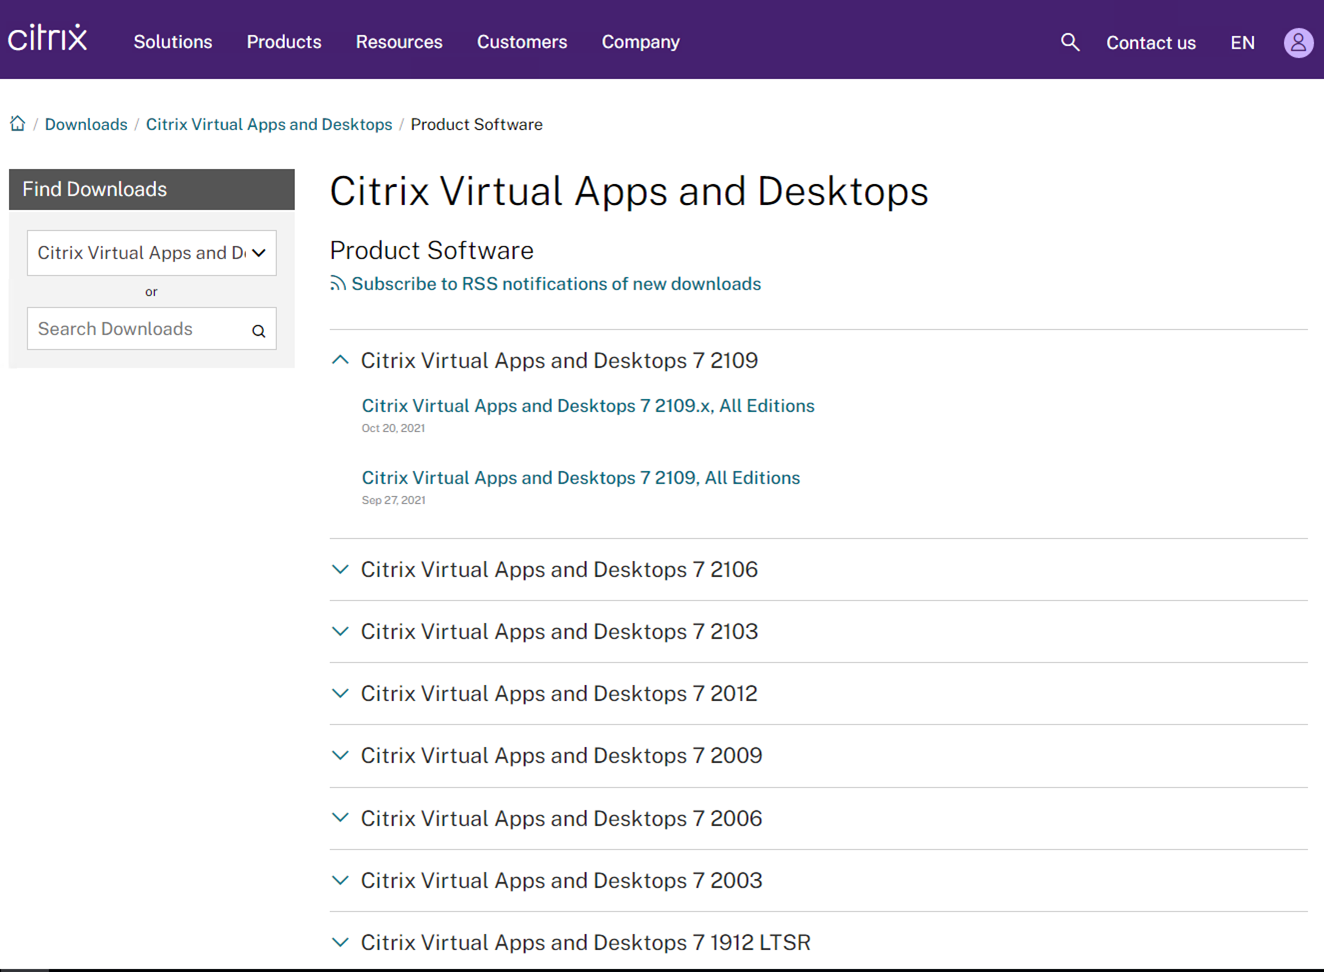 011422 2304 Howtoupgrad5 - How to upgrade to Citrix Virtual Apps 7 2109